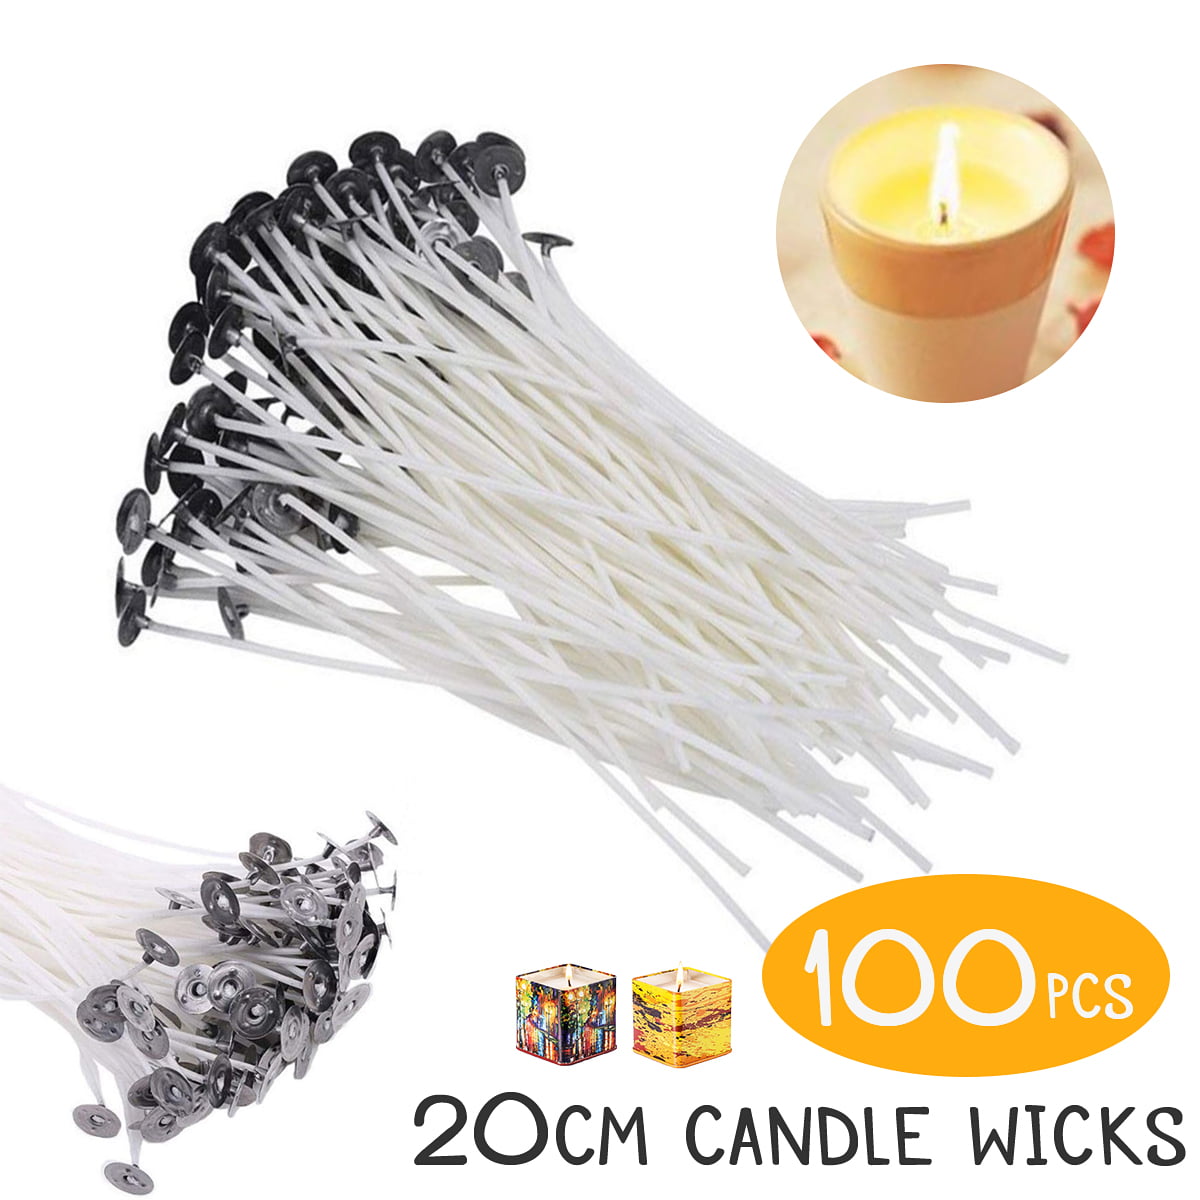 Waxed Natural Wick 100pcs*20cm Candle Making Kit DIY Low Smoke Candle Wick with 100 Pieces Double-Sided Dots Wick Stickers and 1 Piece Wick Holder Sustainer for DIY Candles WELLXUNK® Prewaxed Wicks 